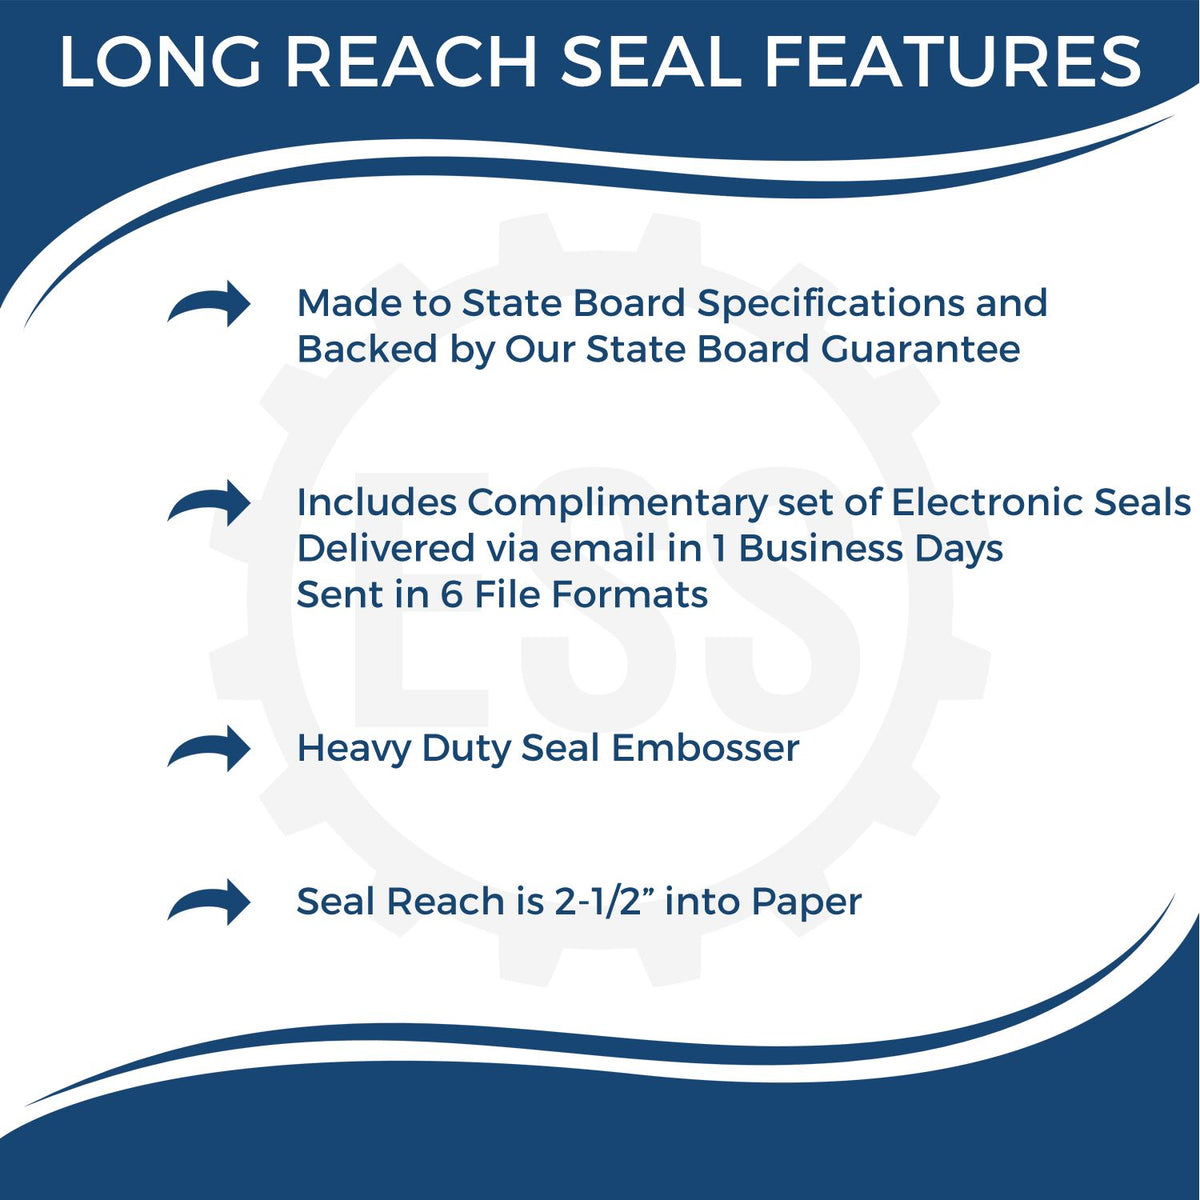 A picture of an infographic highlighting the selling points for the Long Reach Florida PE Seal